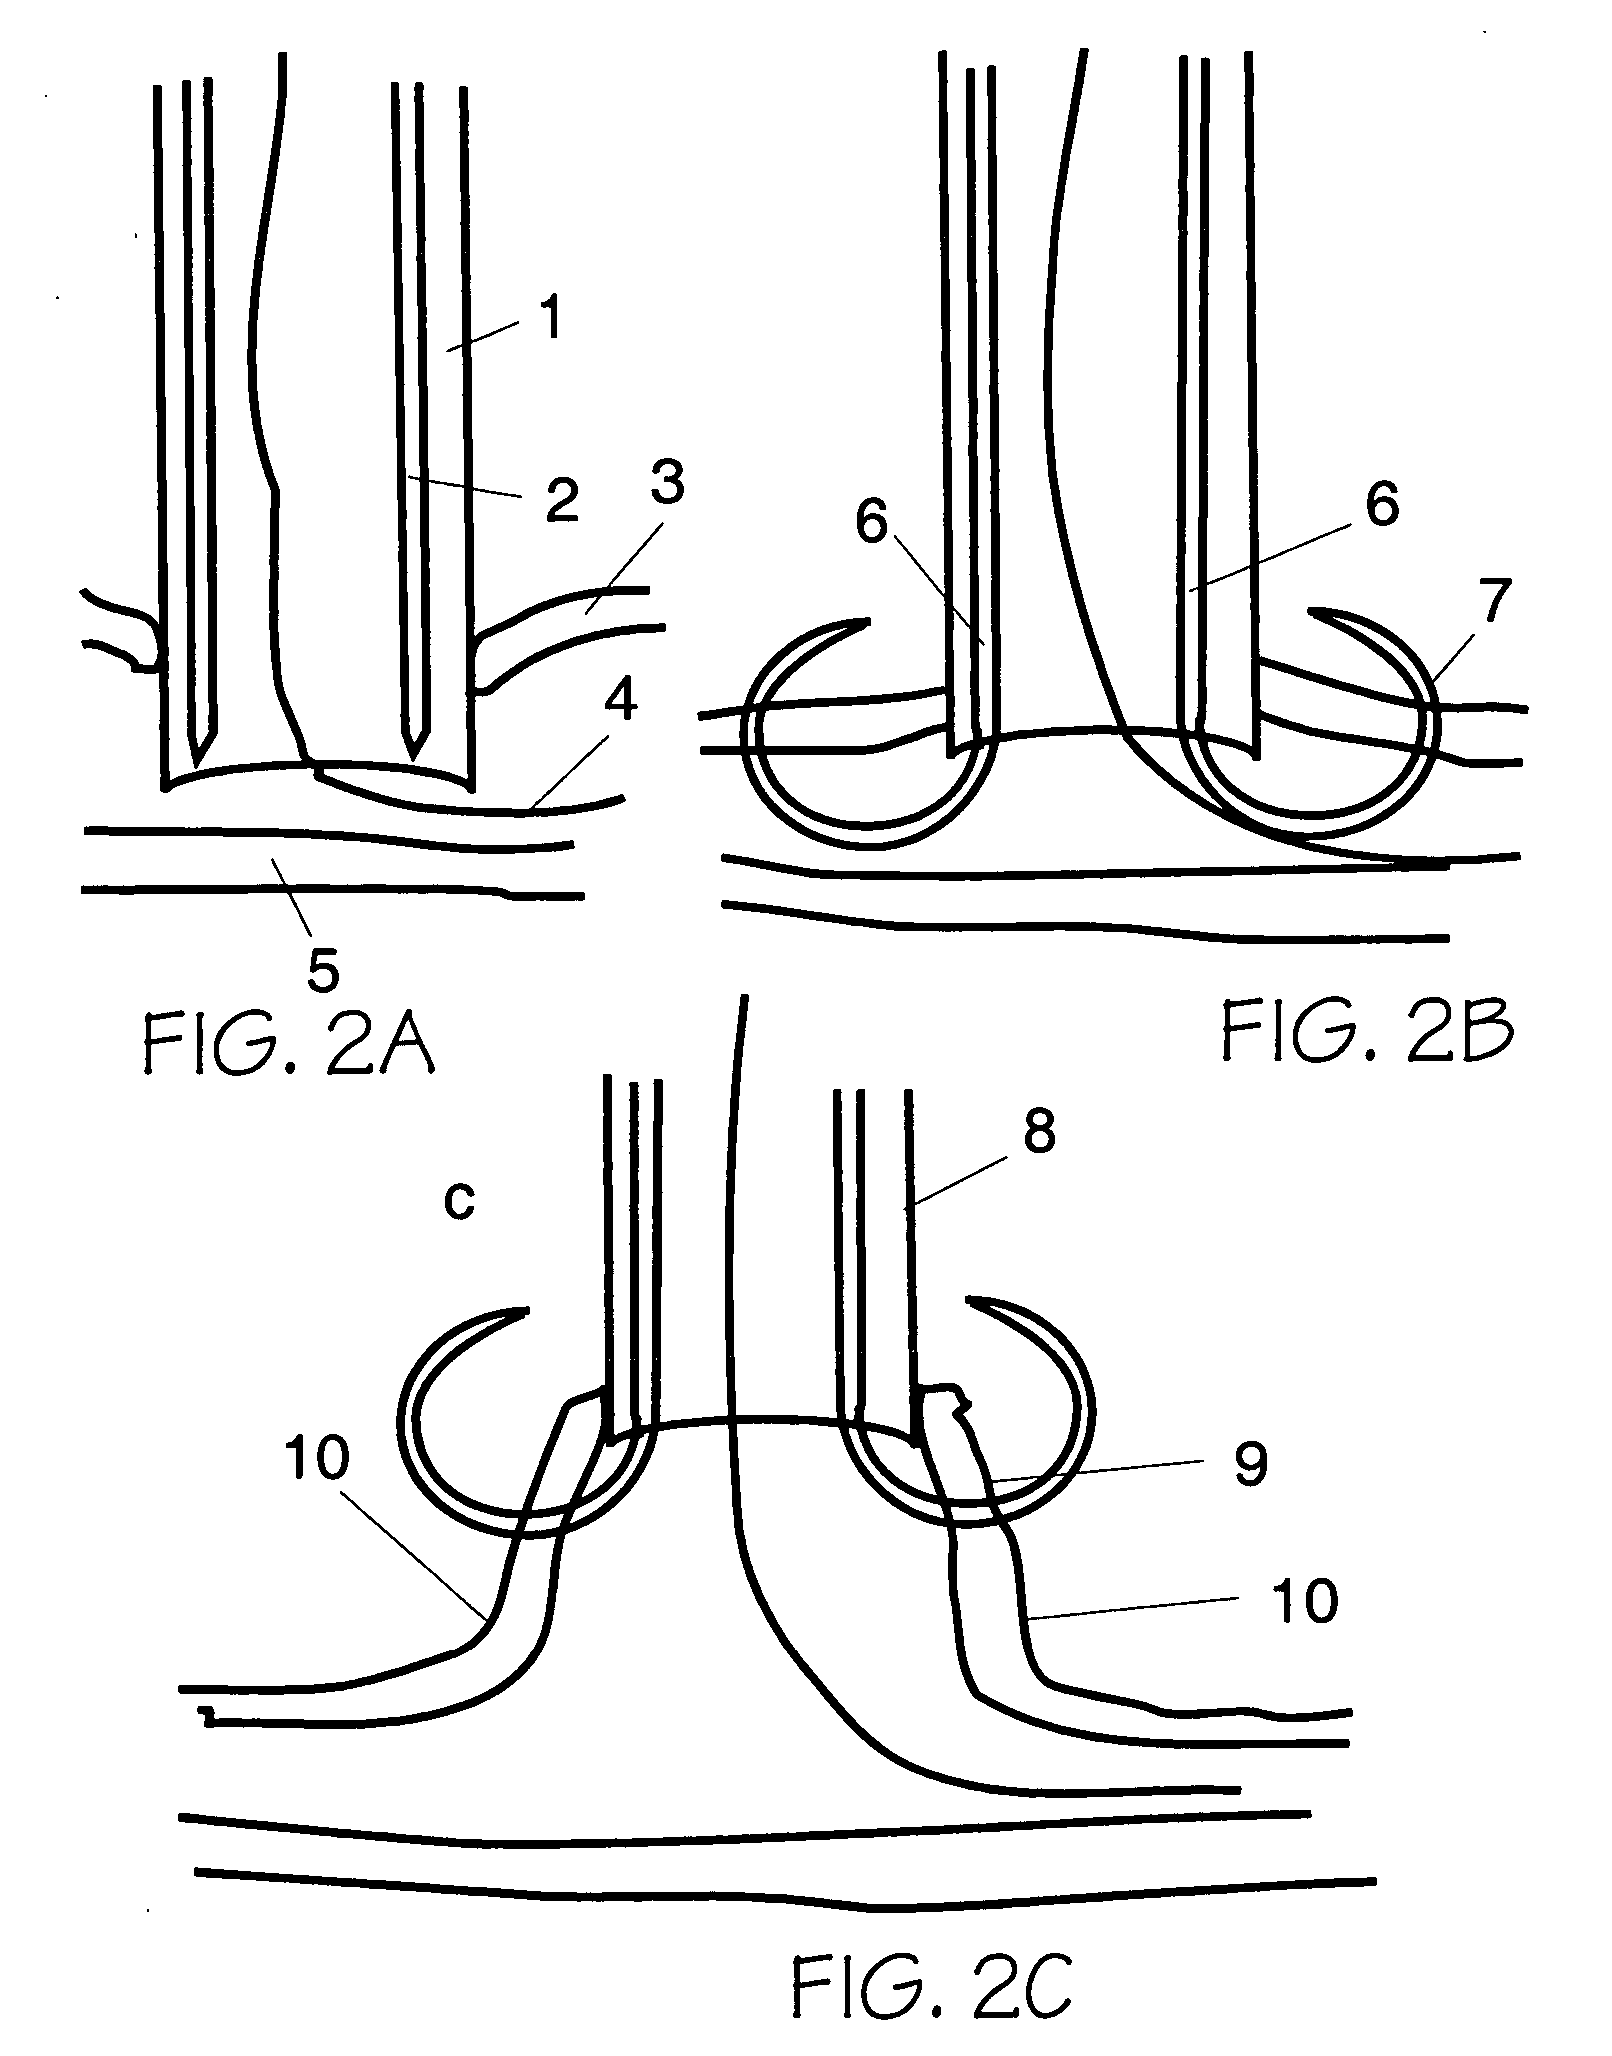 Vascular opening edge eversion methods and apparatuses